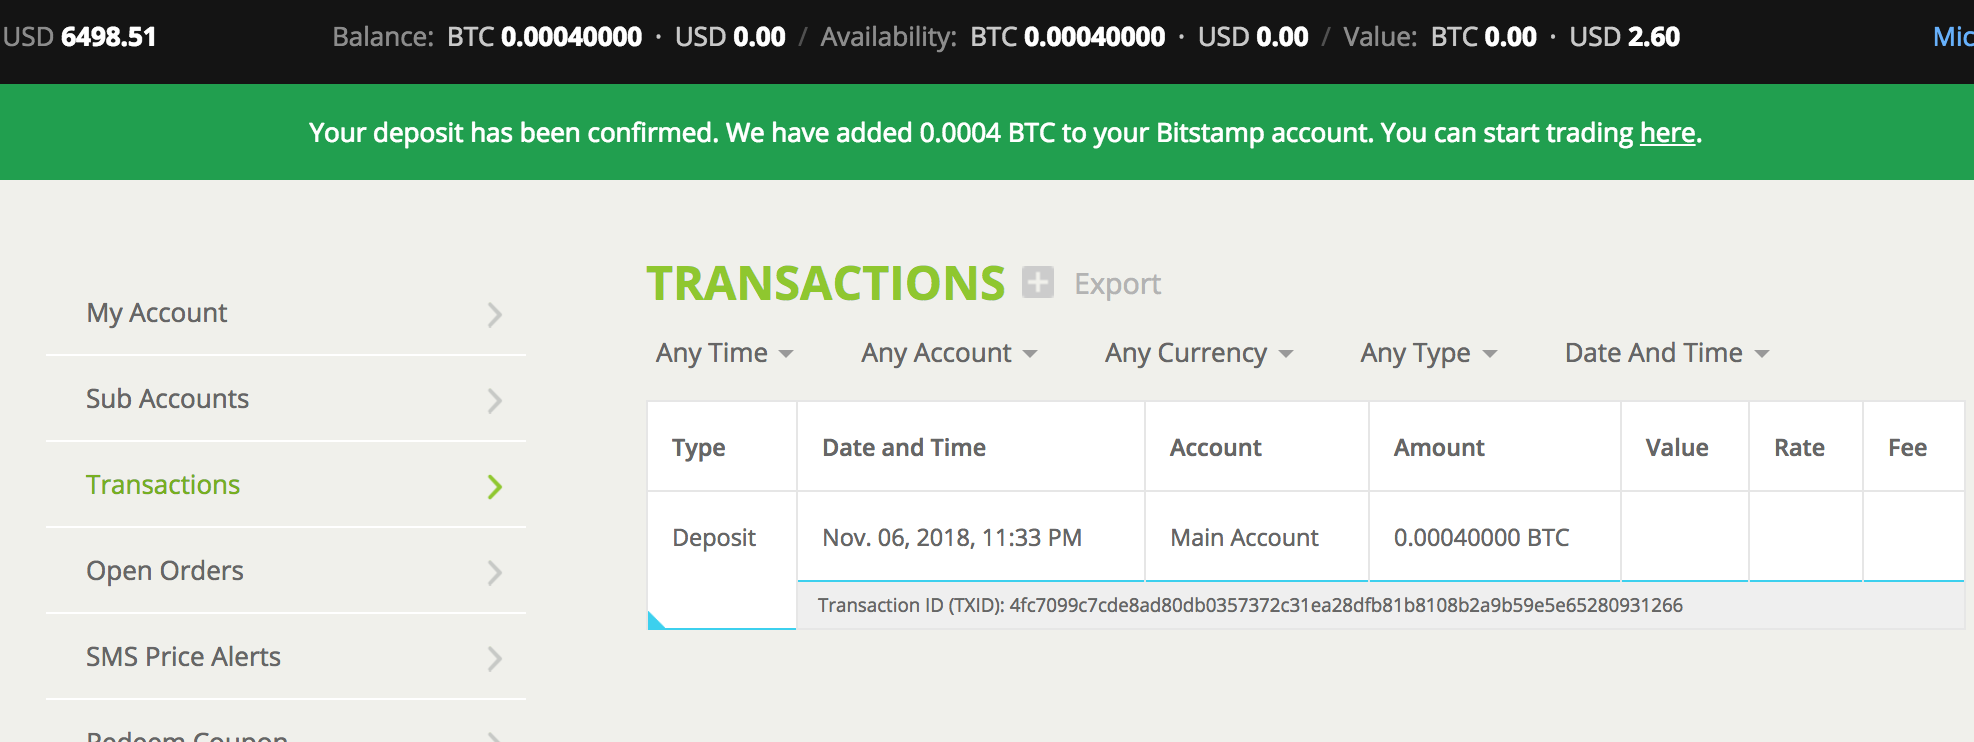 Receiving Bumped RBF Transaction - Only saw transaction after bumped confirmed. Didn’t see original.
